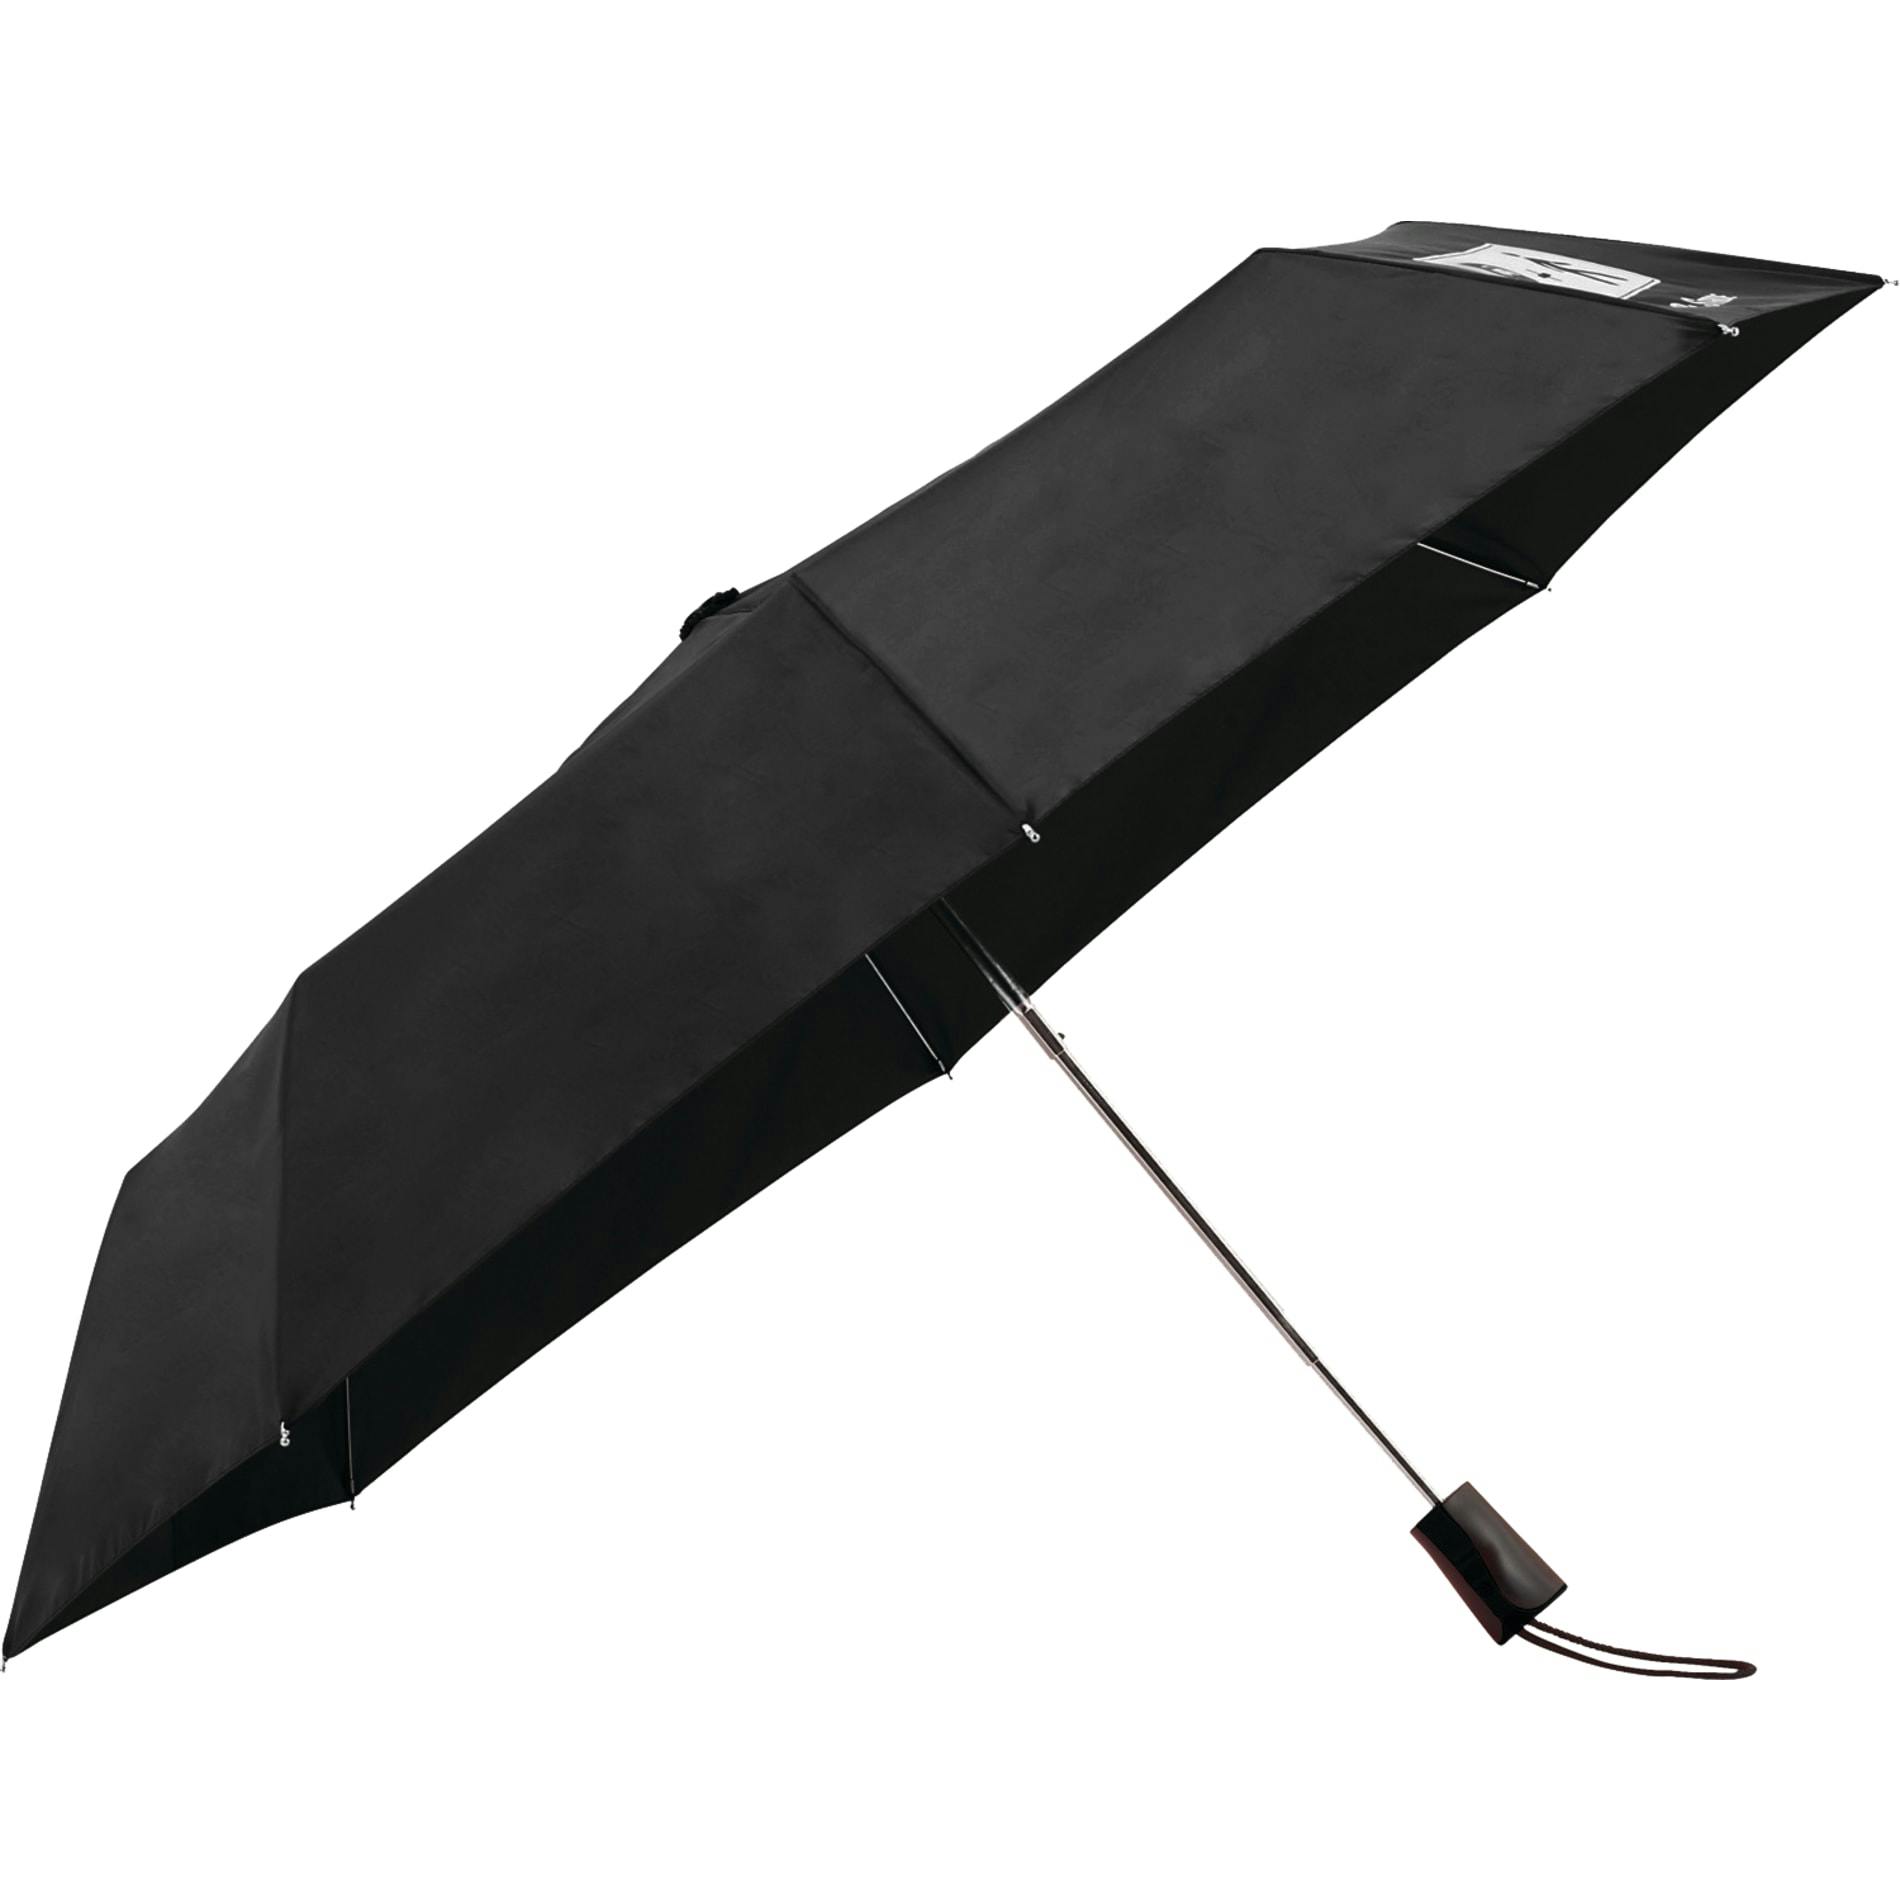 42" totes® 3 Section Auto Open Umbrella - additional Image 2